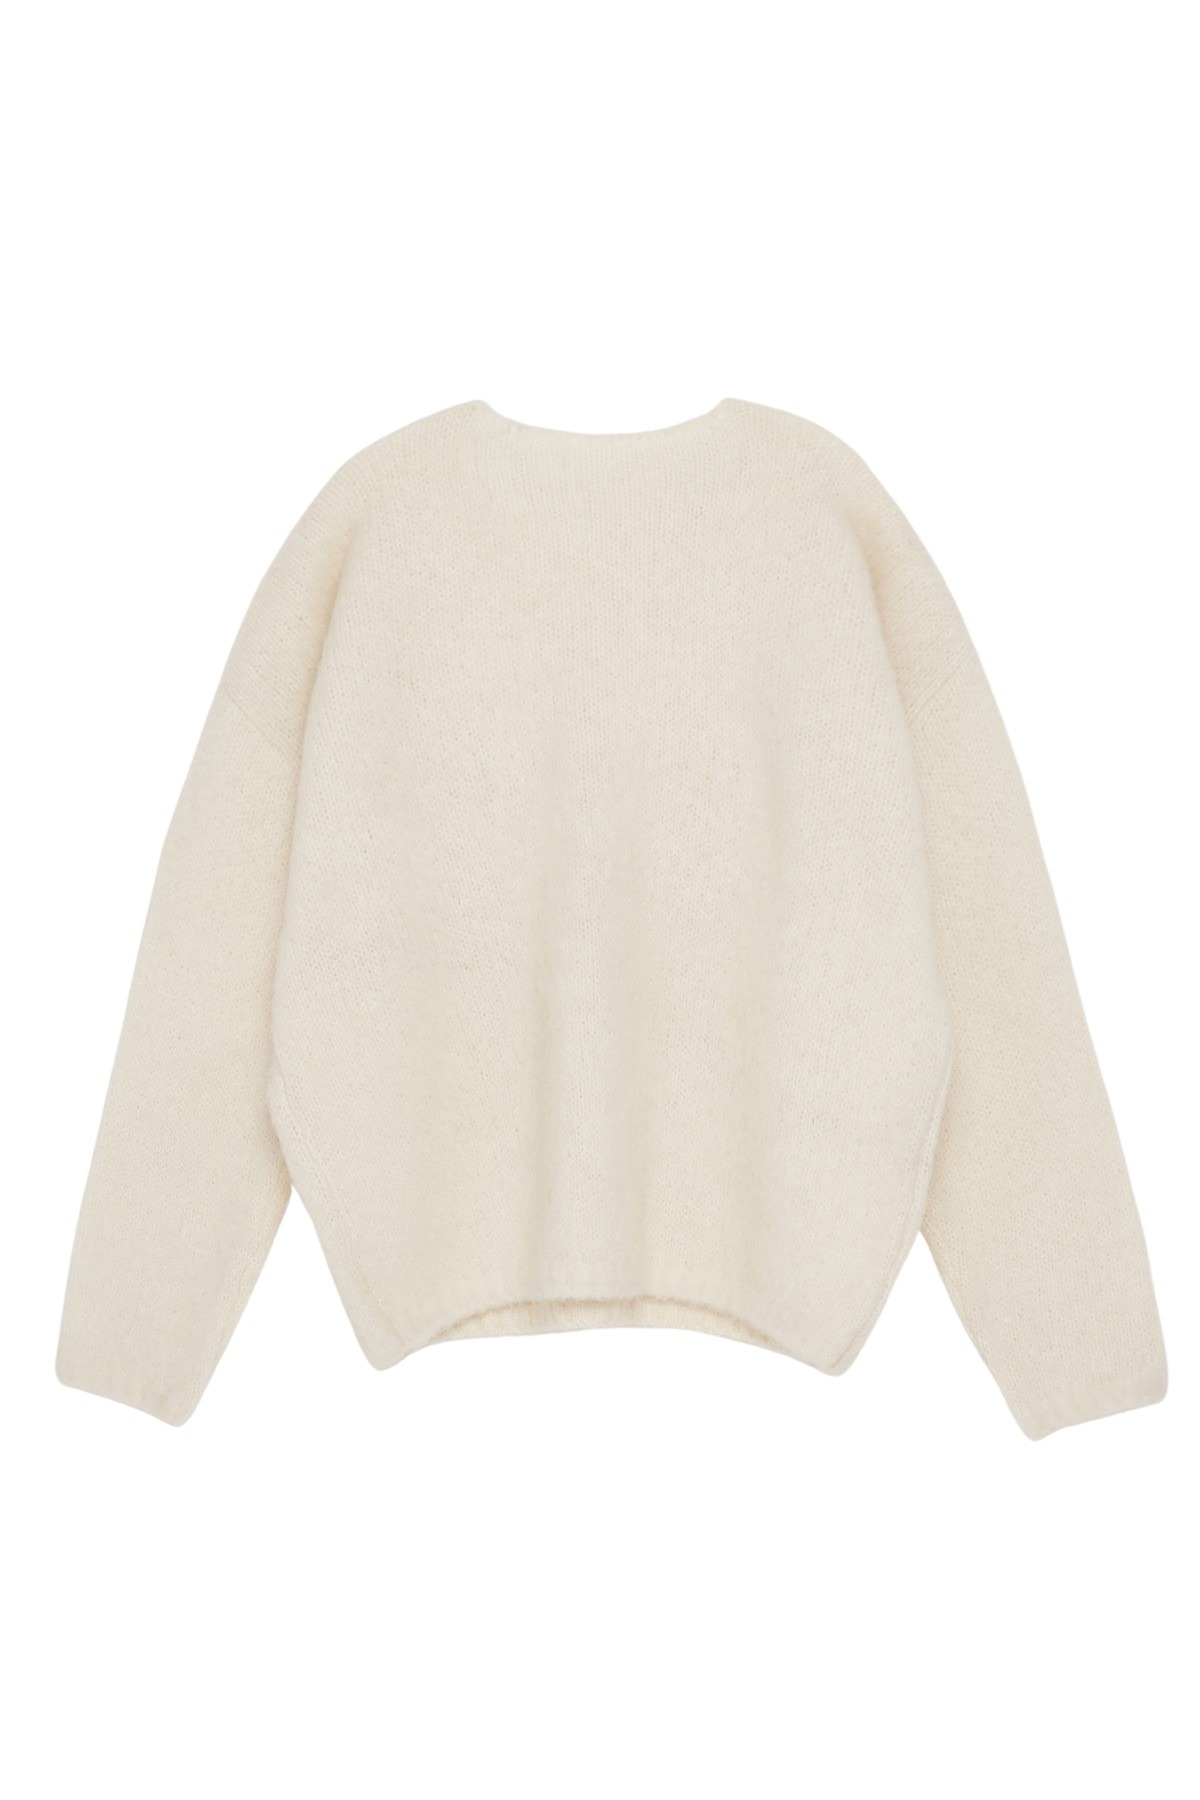 HAND STITCH OVERFIT KNIT PULLOVER IN IVORY